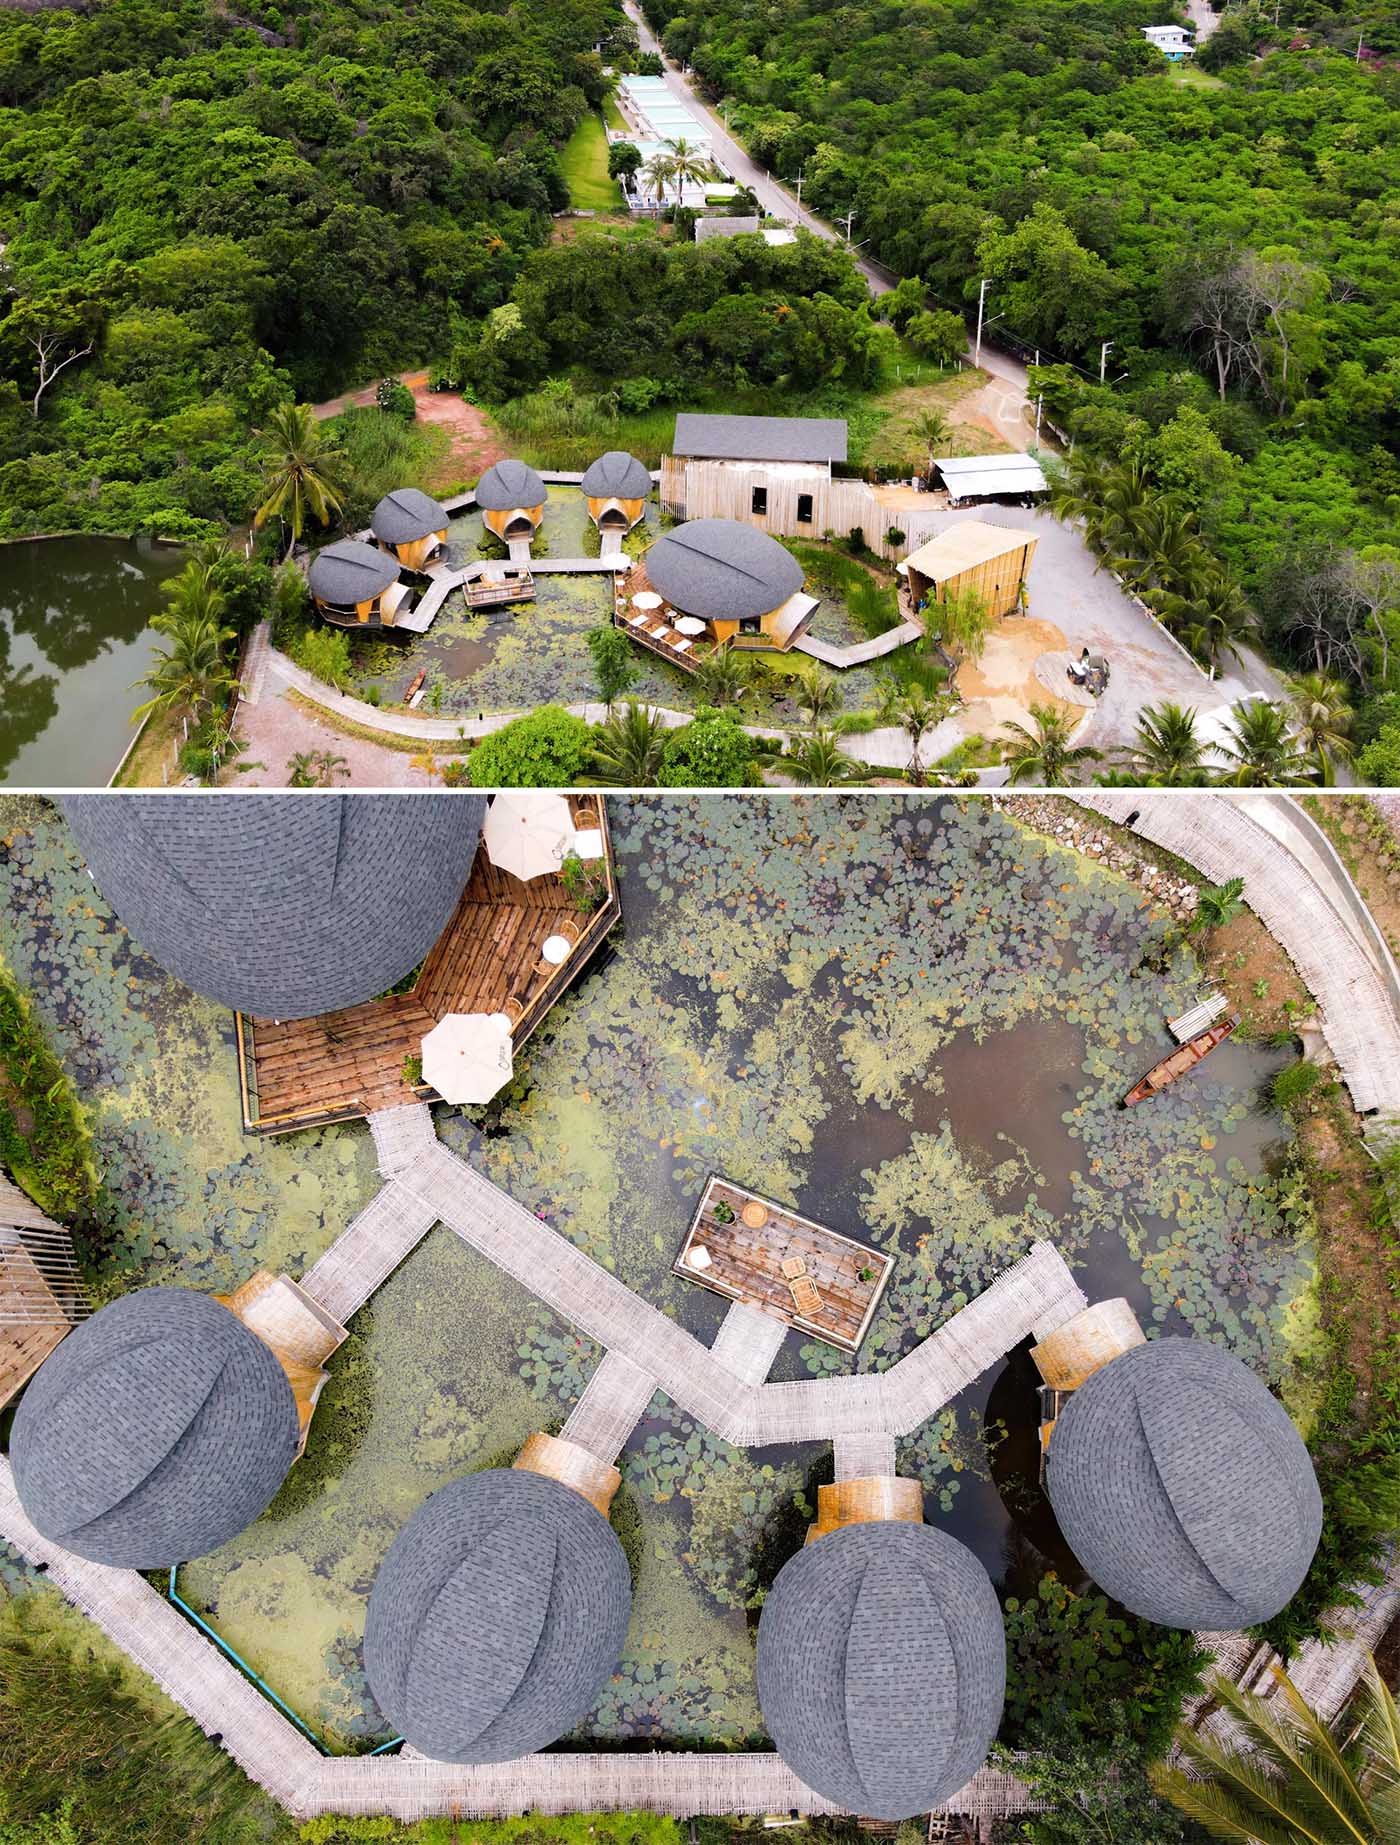 A modern eco-lodge in Thailand, that has cabins shaped like turtle shells that surround a lotus pond.